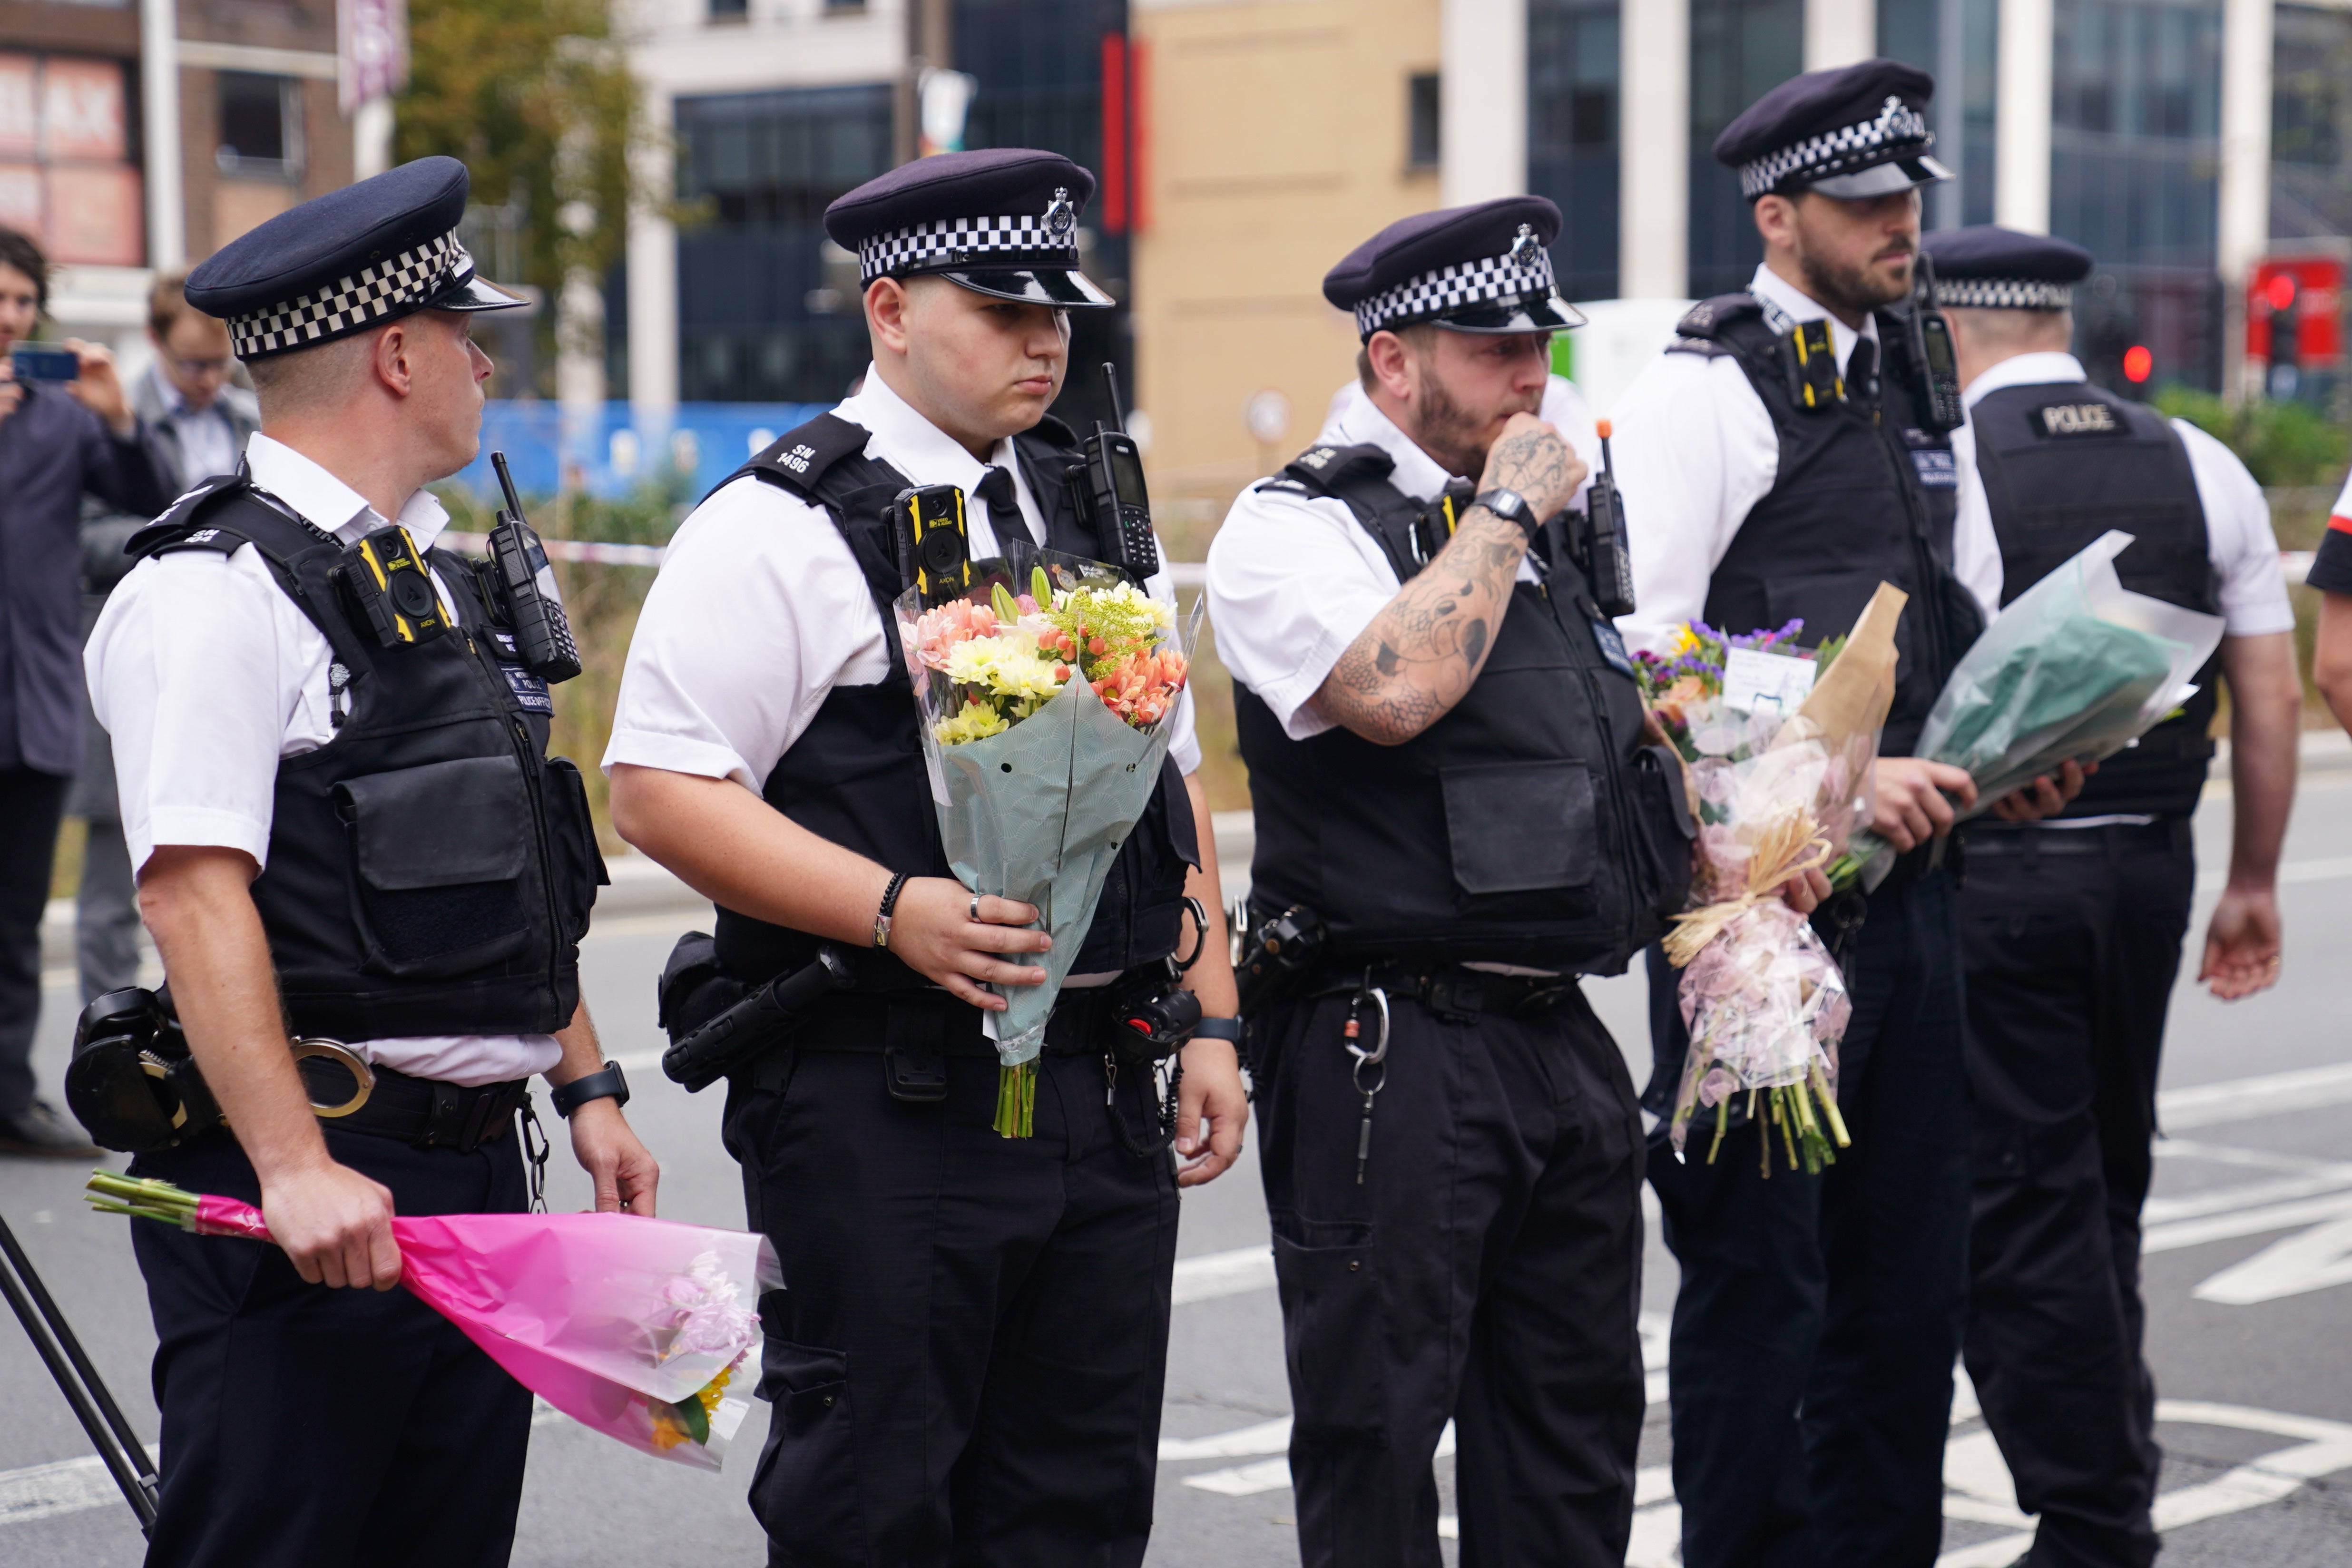 Police officers lay flowers at the scene in Croydon